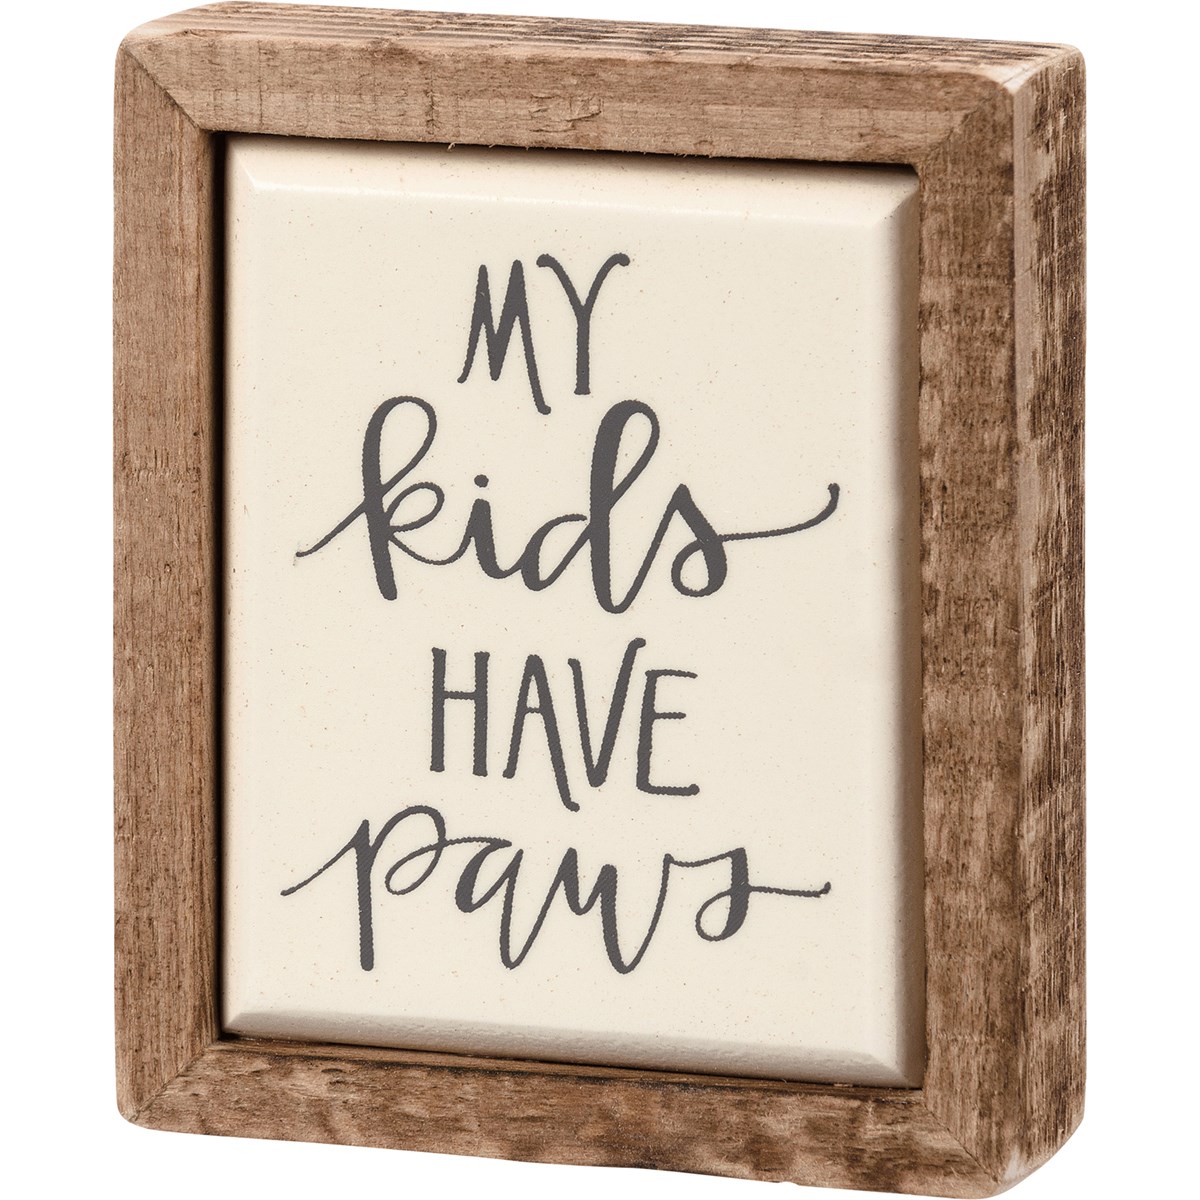 My Kids Have Paws Box Sign Mini - Wood